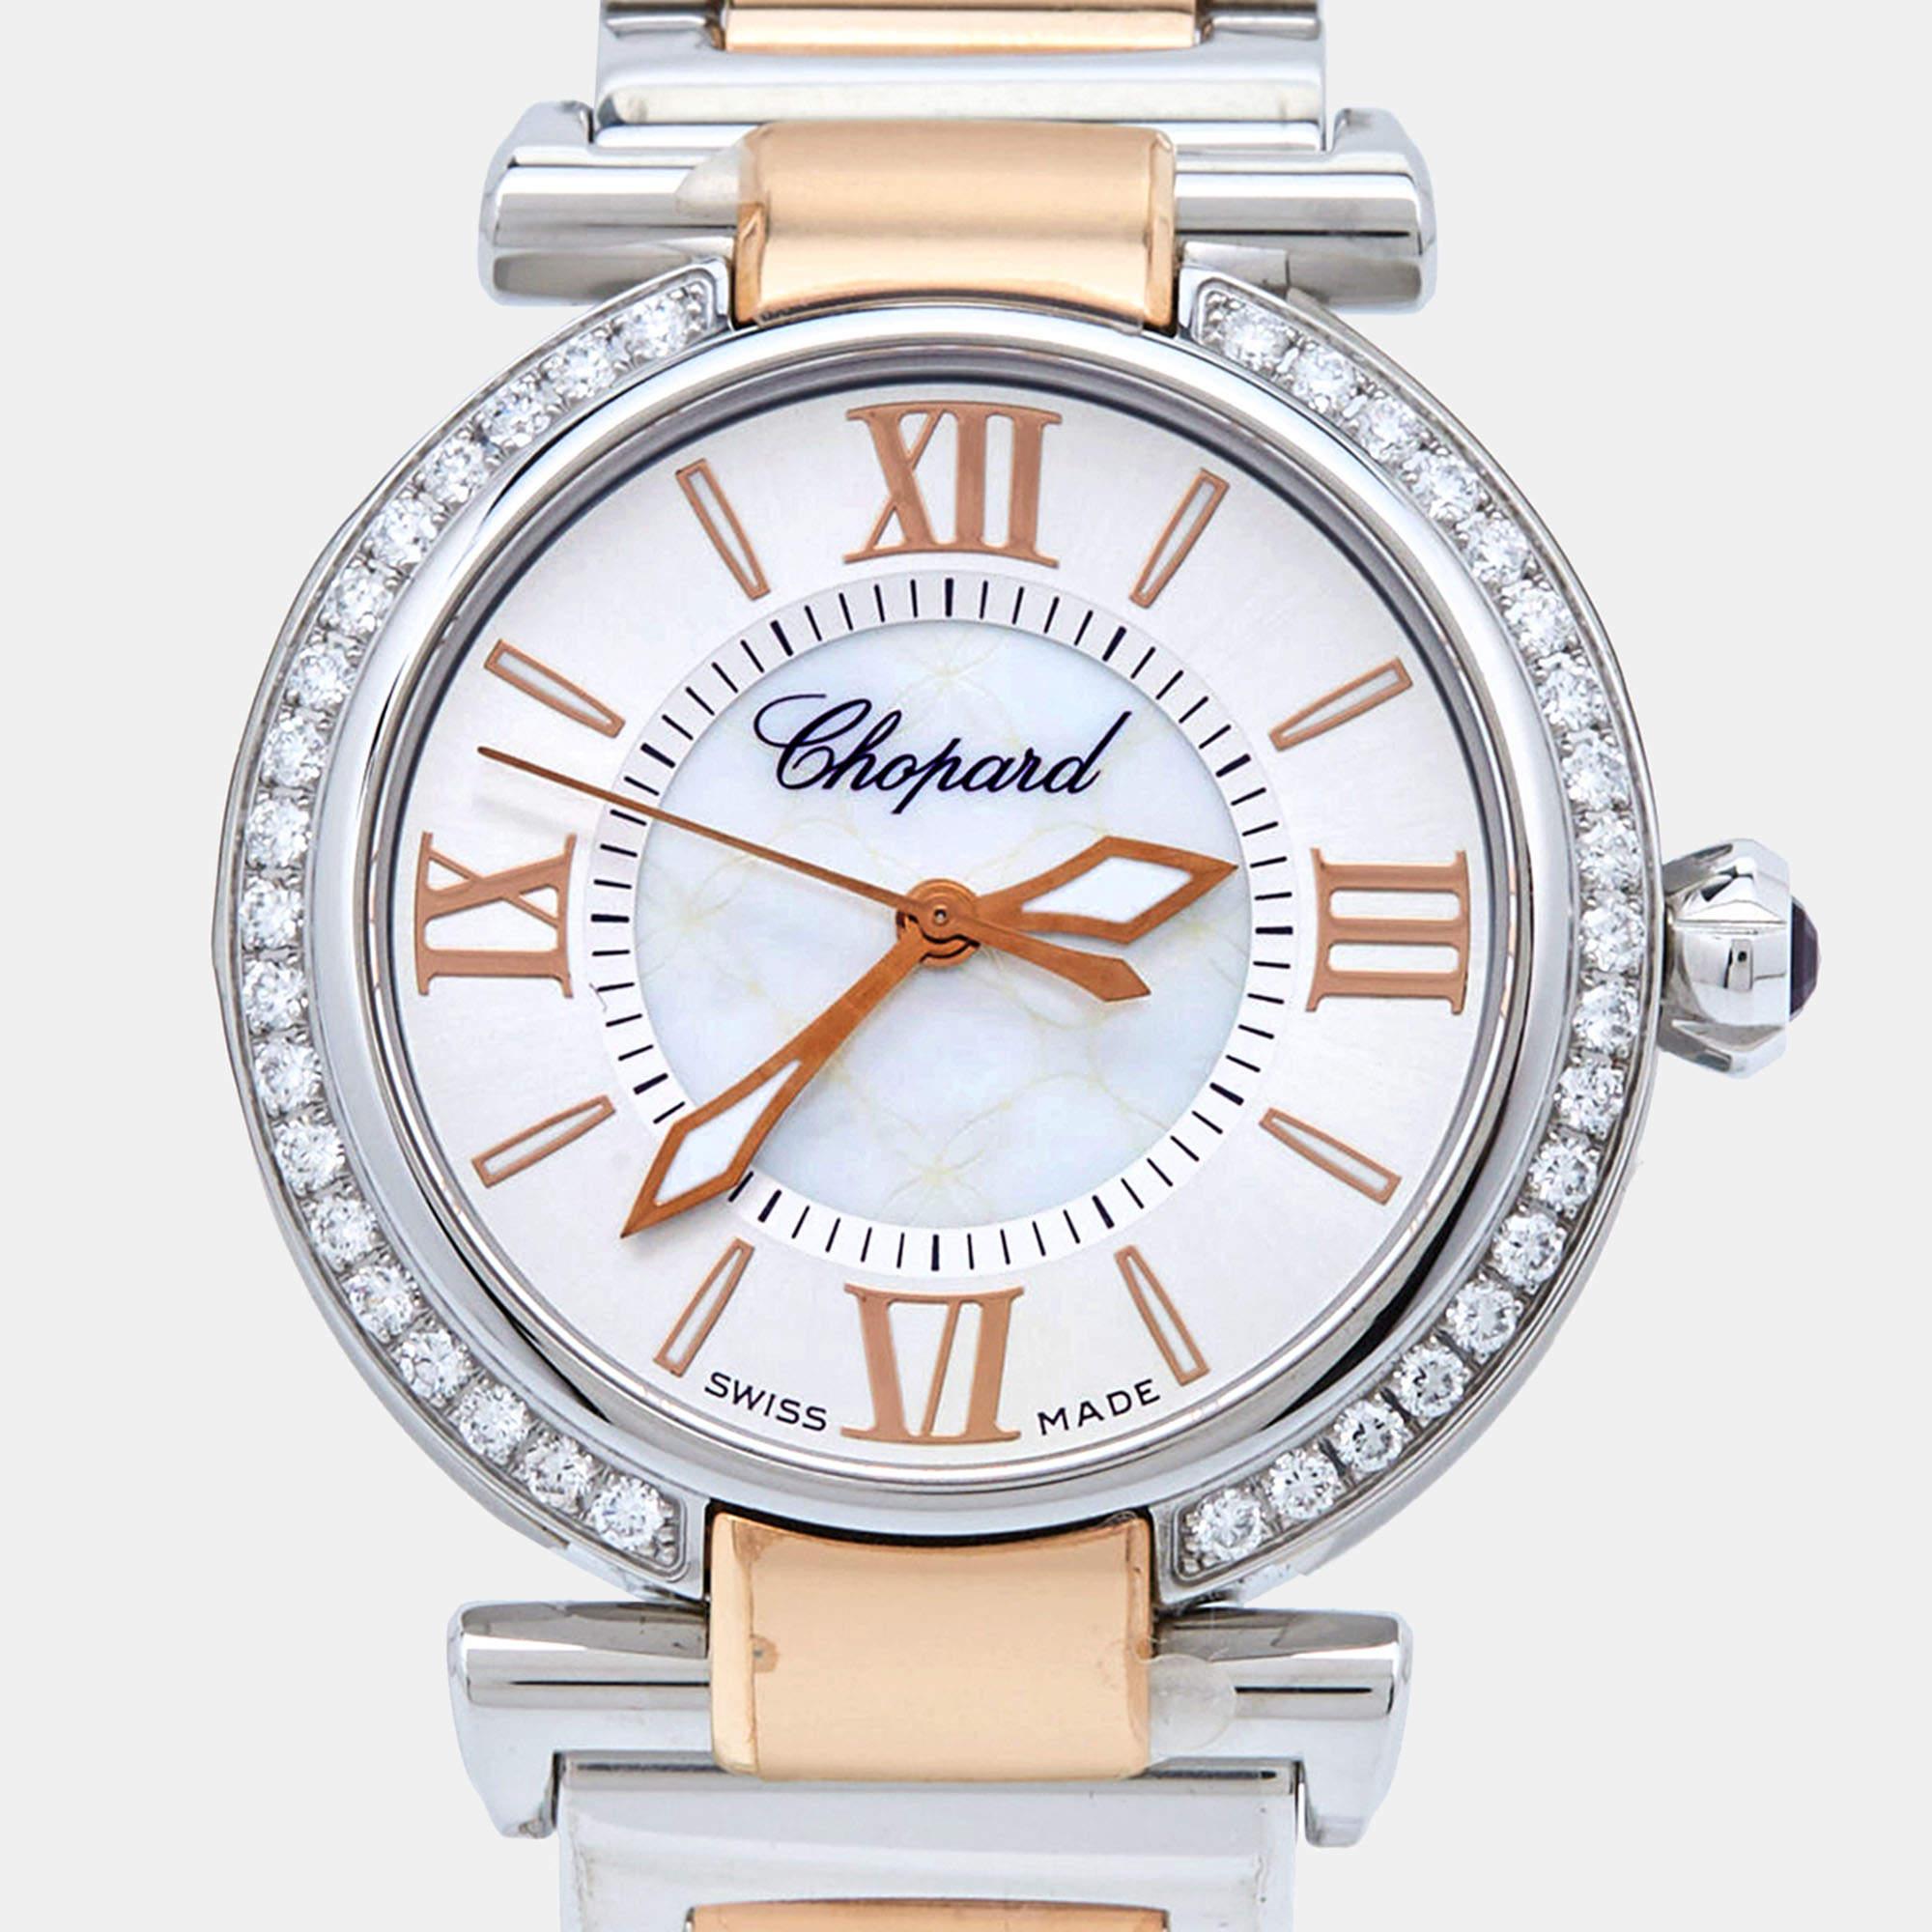 This Imperiale watch is a testament to the wondrous craftsmanship and painstaking effort that goes into making a Chopard wonder! Made using 18k rose gold and stainless steel, the case has a Mother of Pearl dial and a diamond-studded bezel to catch